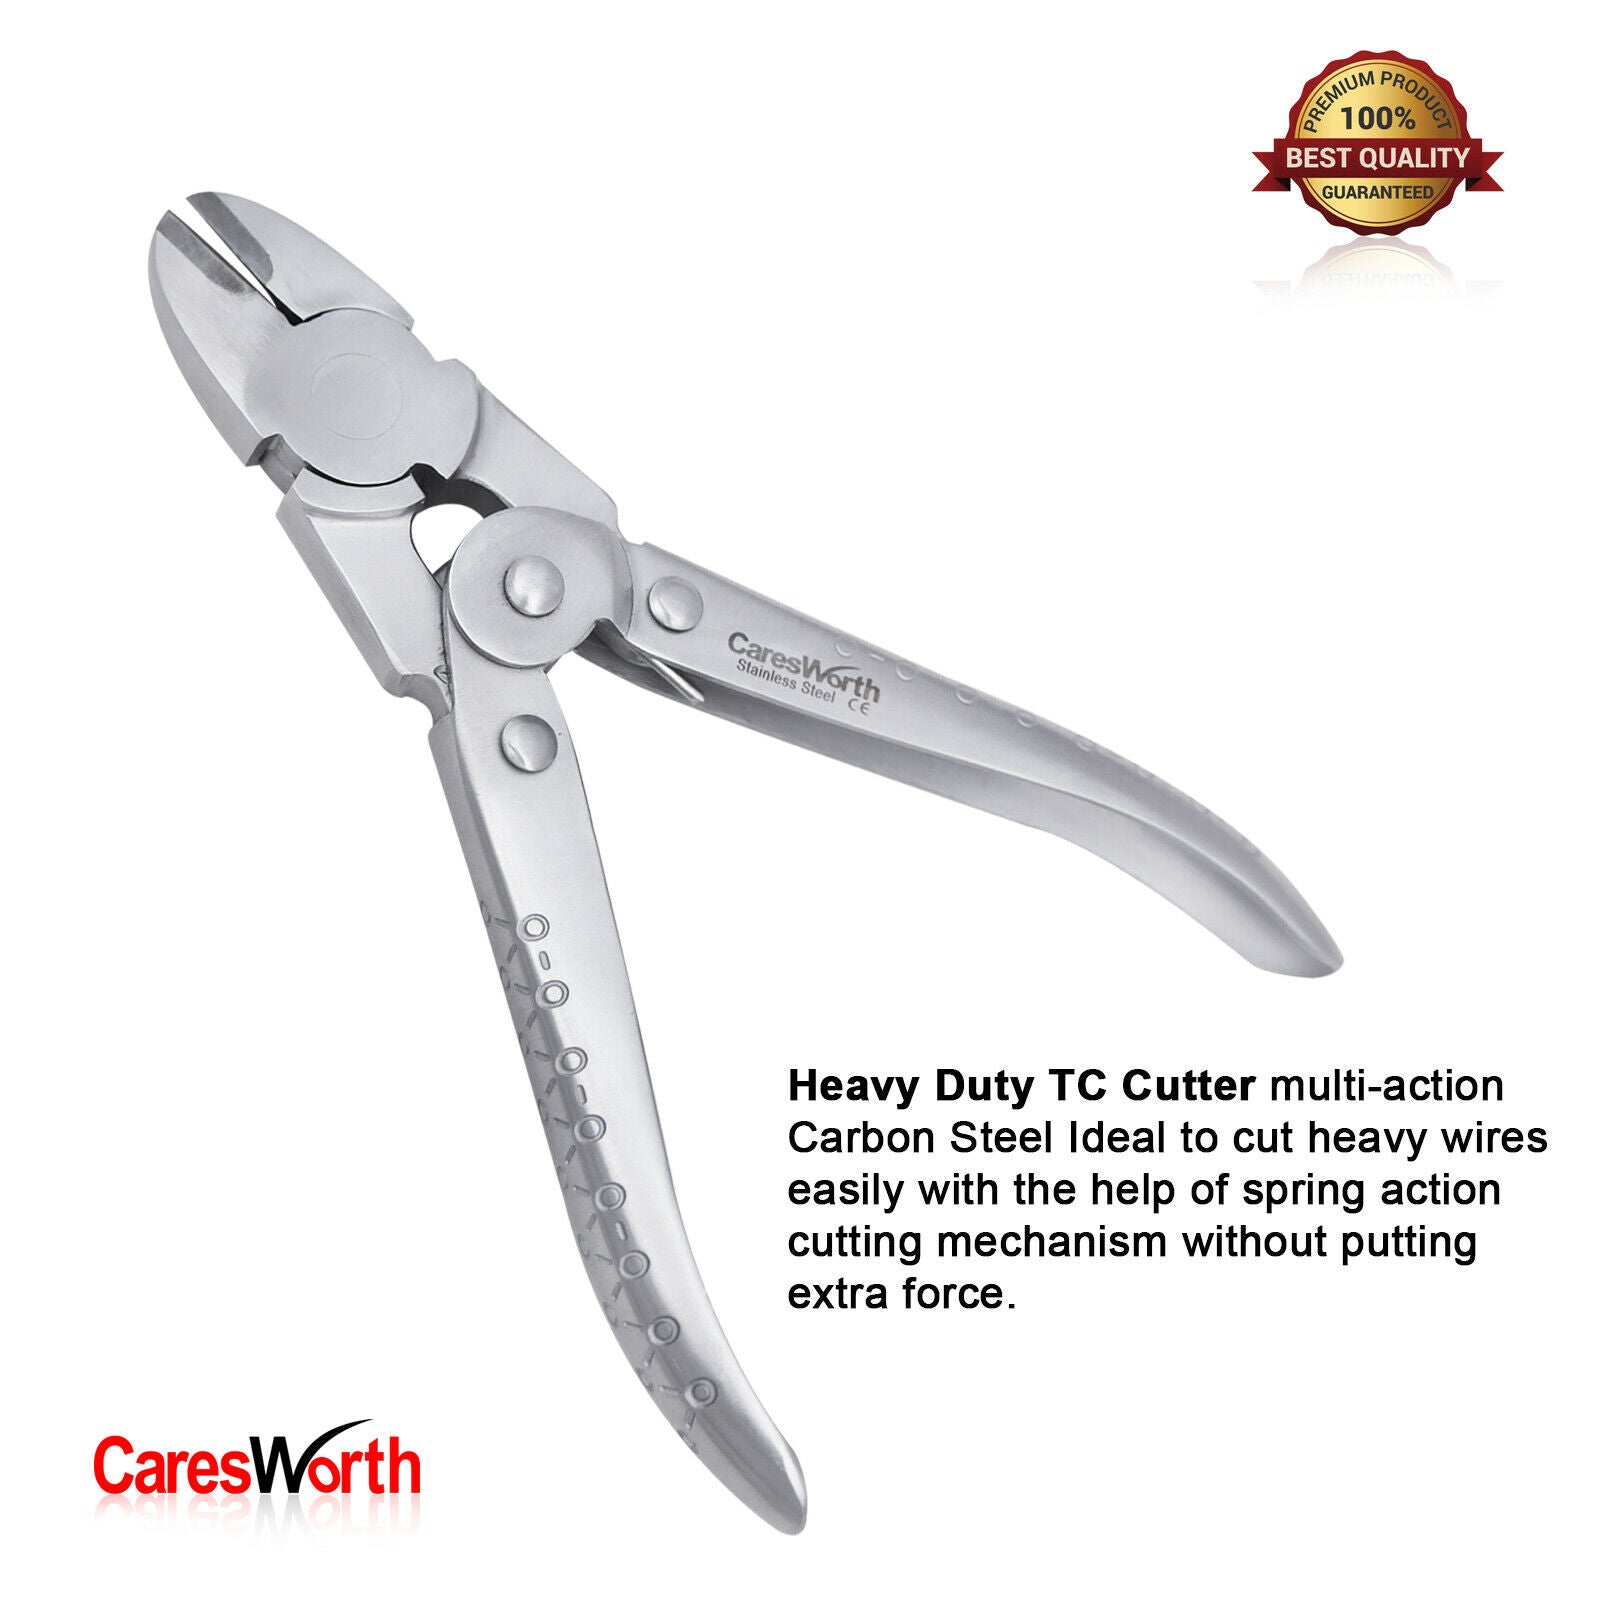 Heavy Duty Orthodontic TC Hard Wire Cutter Dental Surgical Spring Action CE